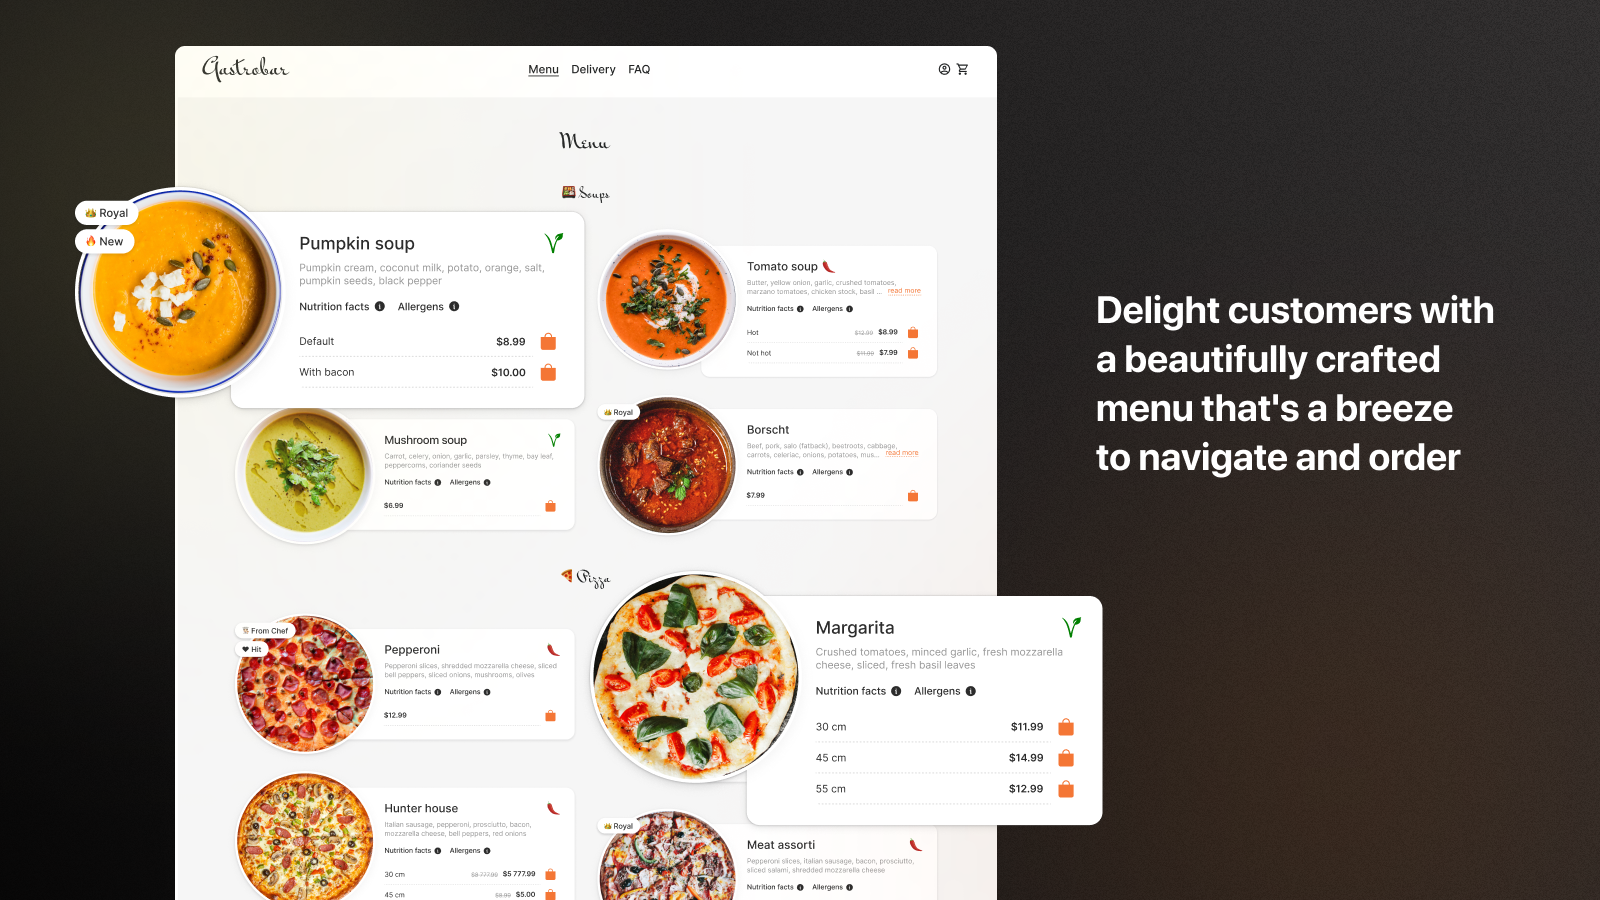 Delight customers with a beautifully crafted menu that's a breez